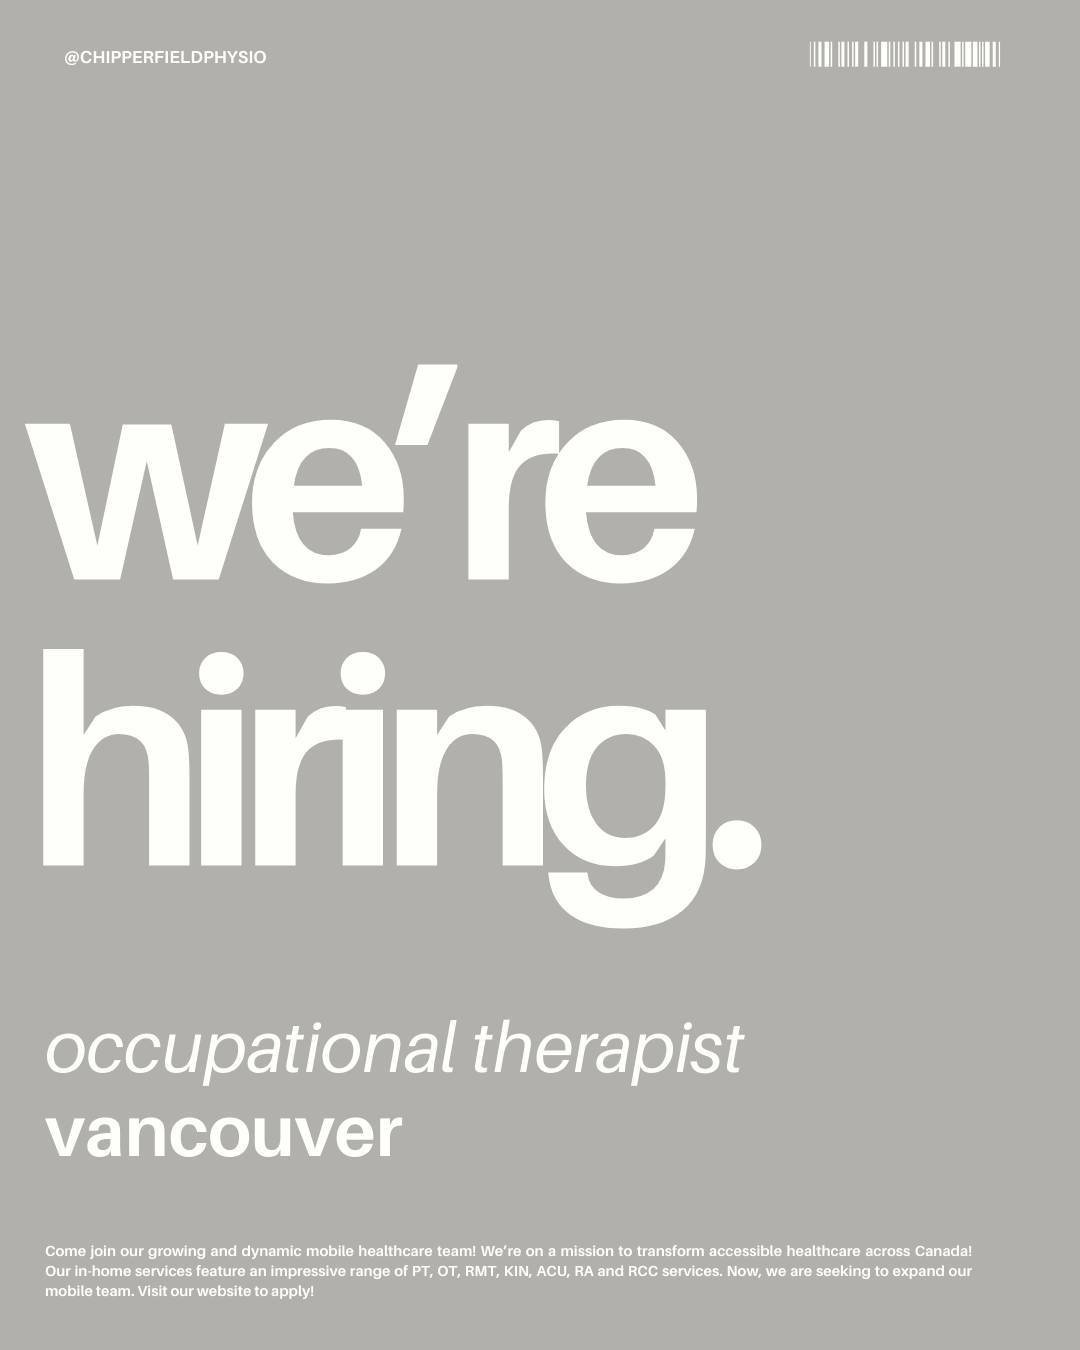 Come join our growing and dynamic mobile healthcare team! 💥

We&rsquo;re on a mission to transform accessible healthcare across BC. Our in-home services feature an impressive range of PT, OT, RMT, KIN, ACU, RA and RCC services.

Now, we are seeking 